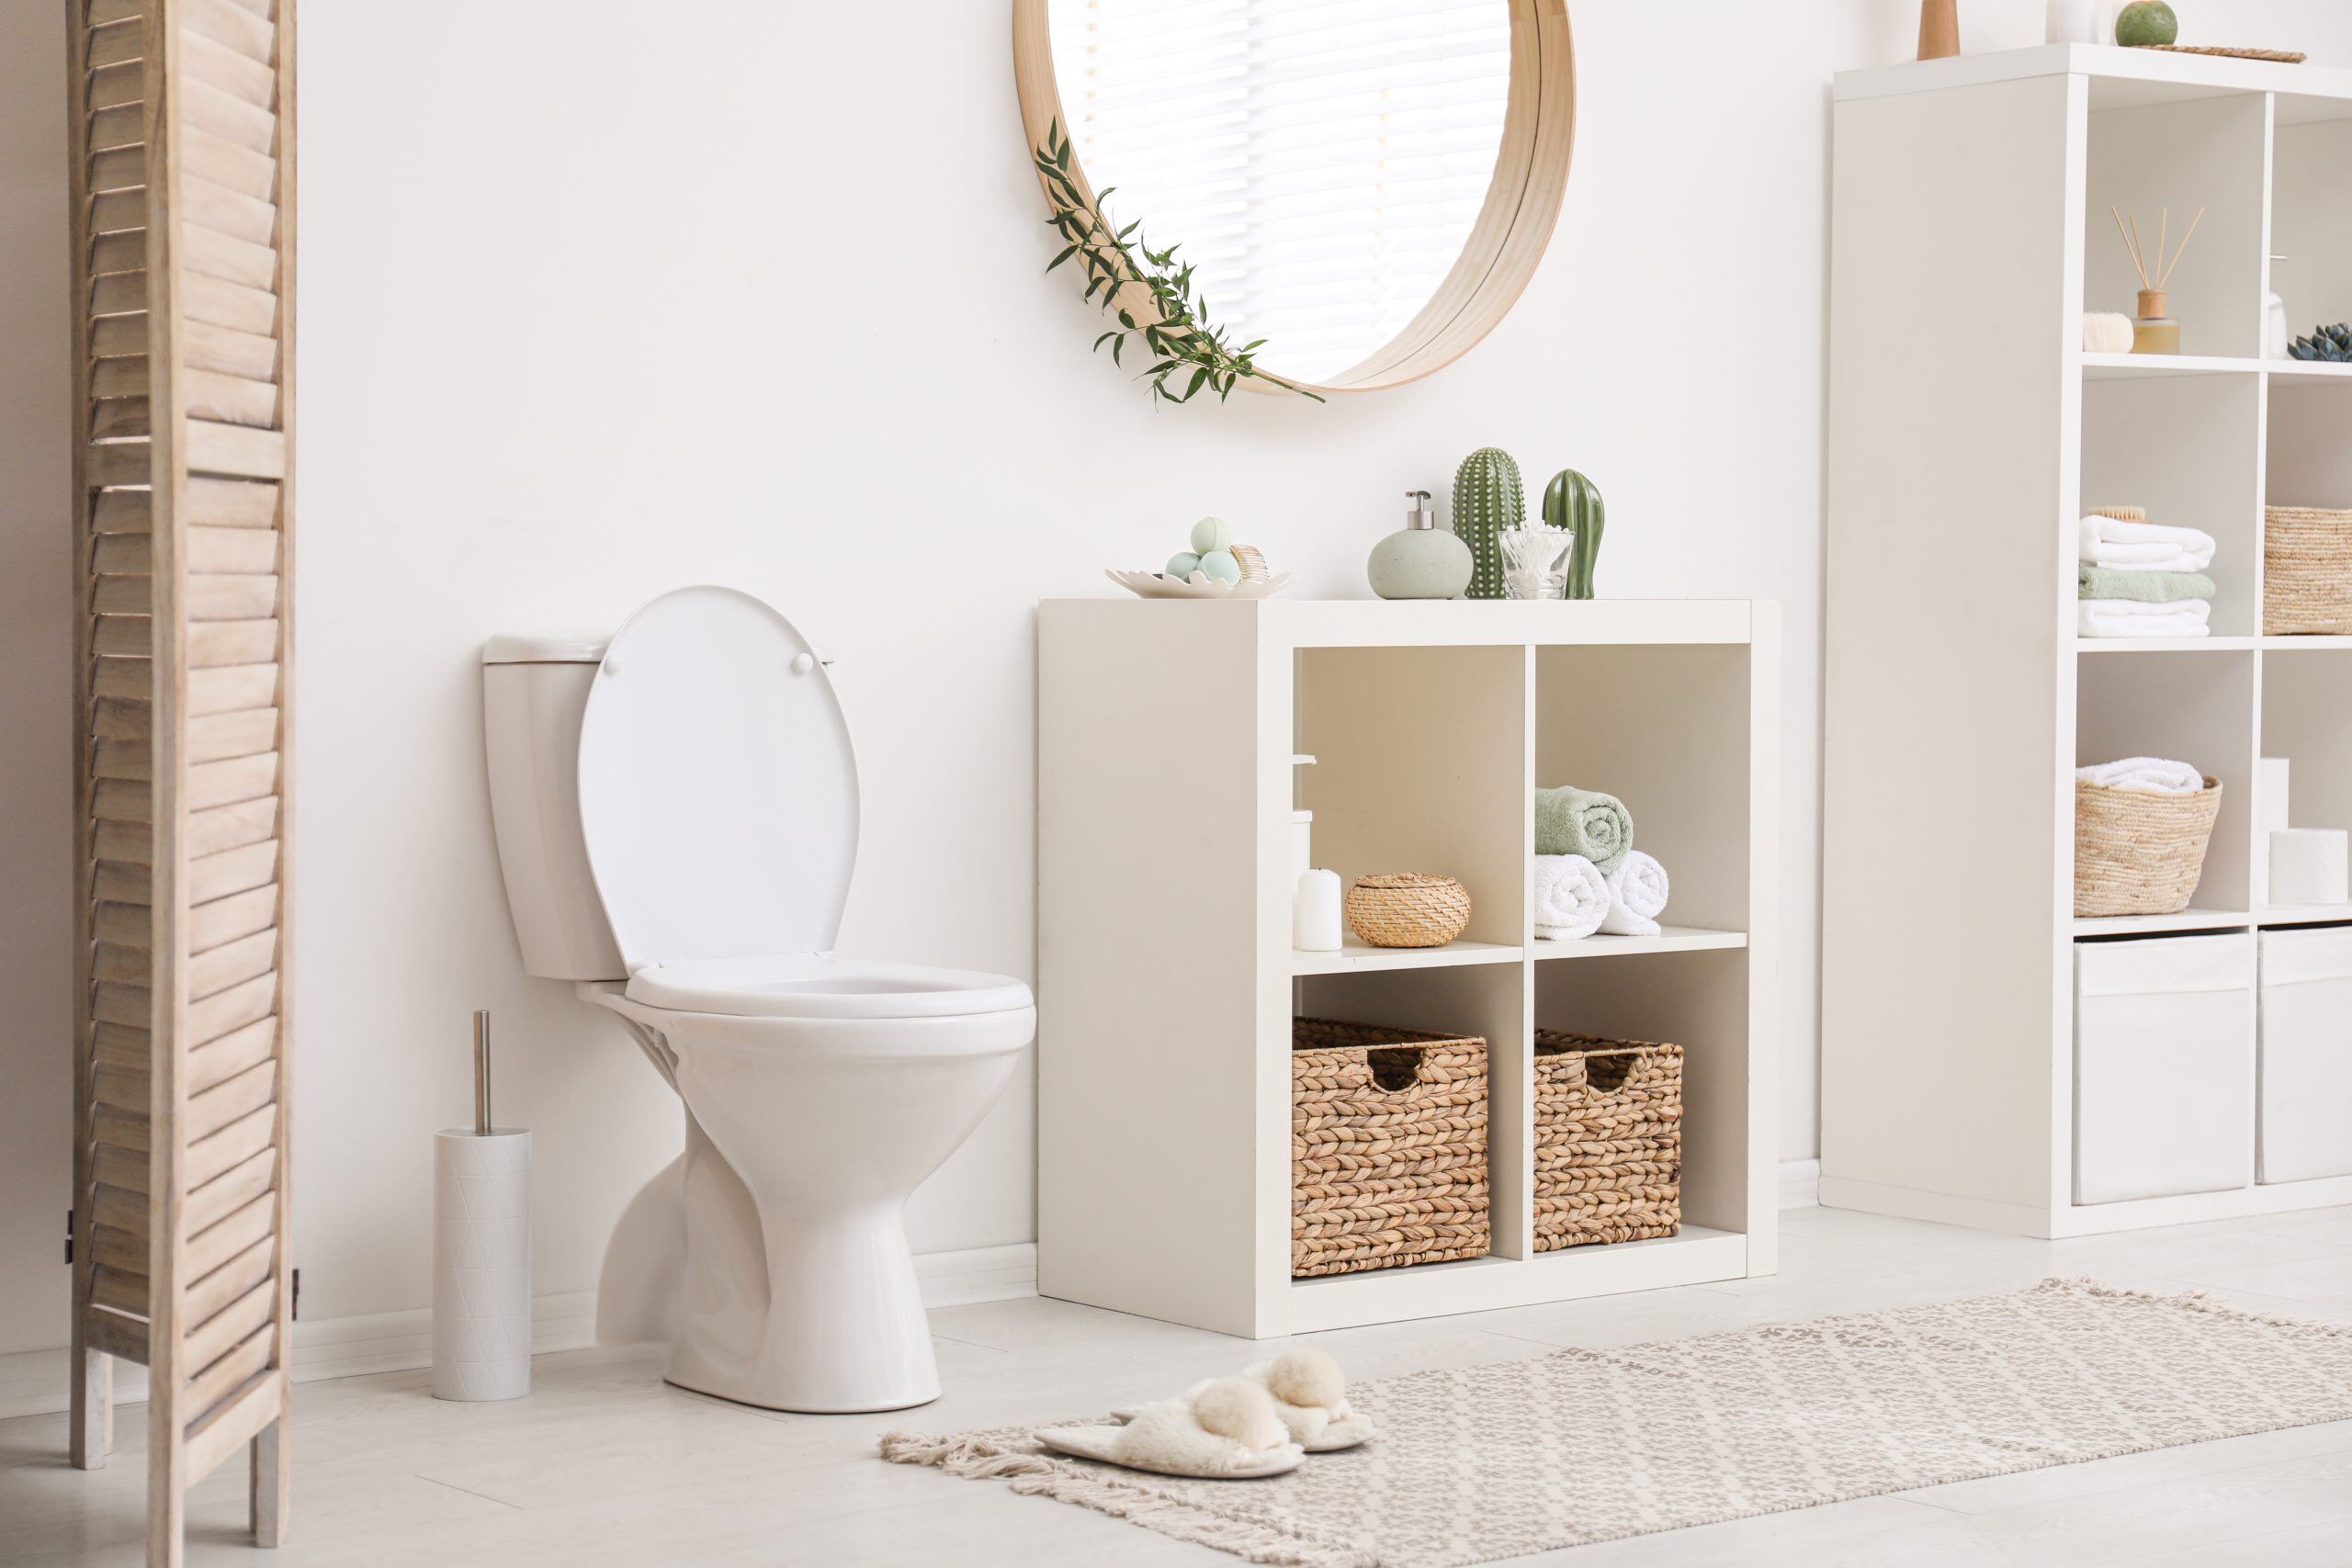 Which Is Better: Wood Or Plastic Toilet Seat